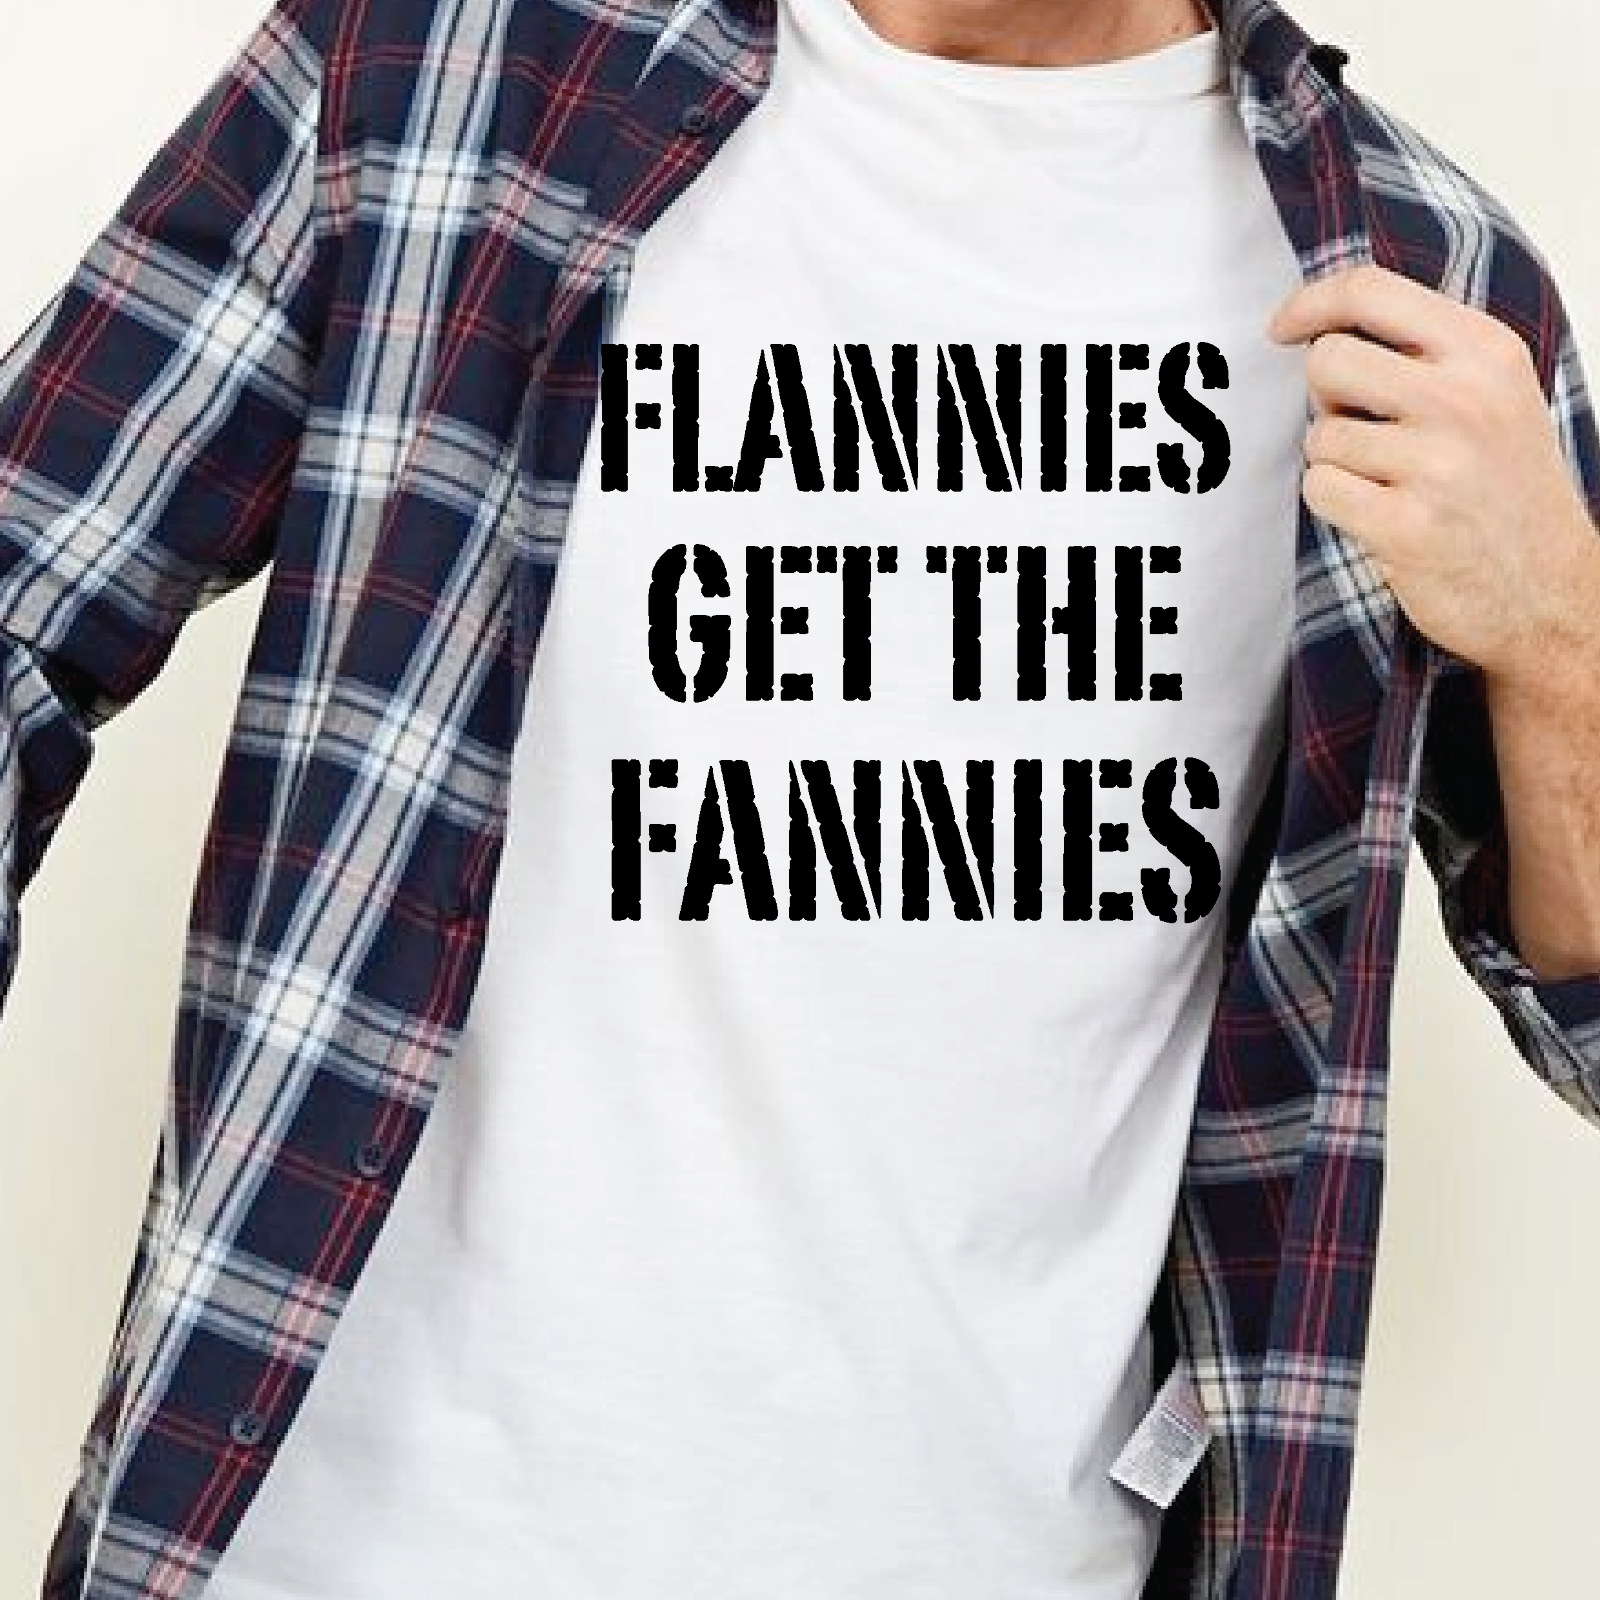 flannies get the fannies